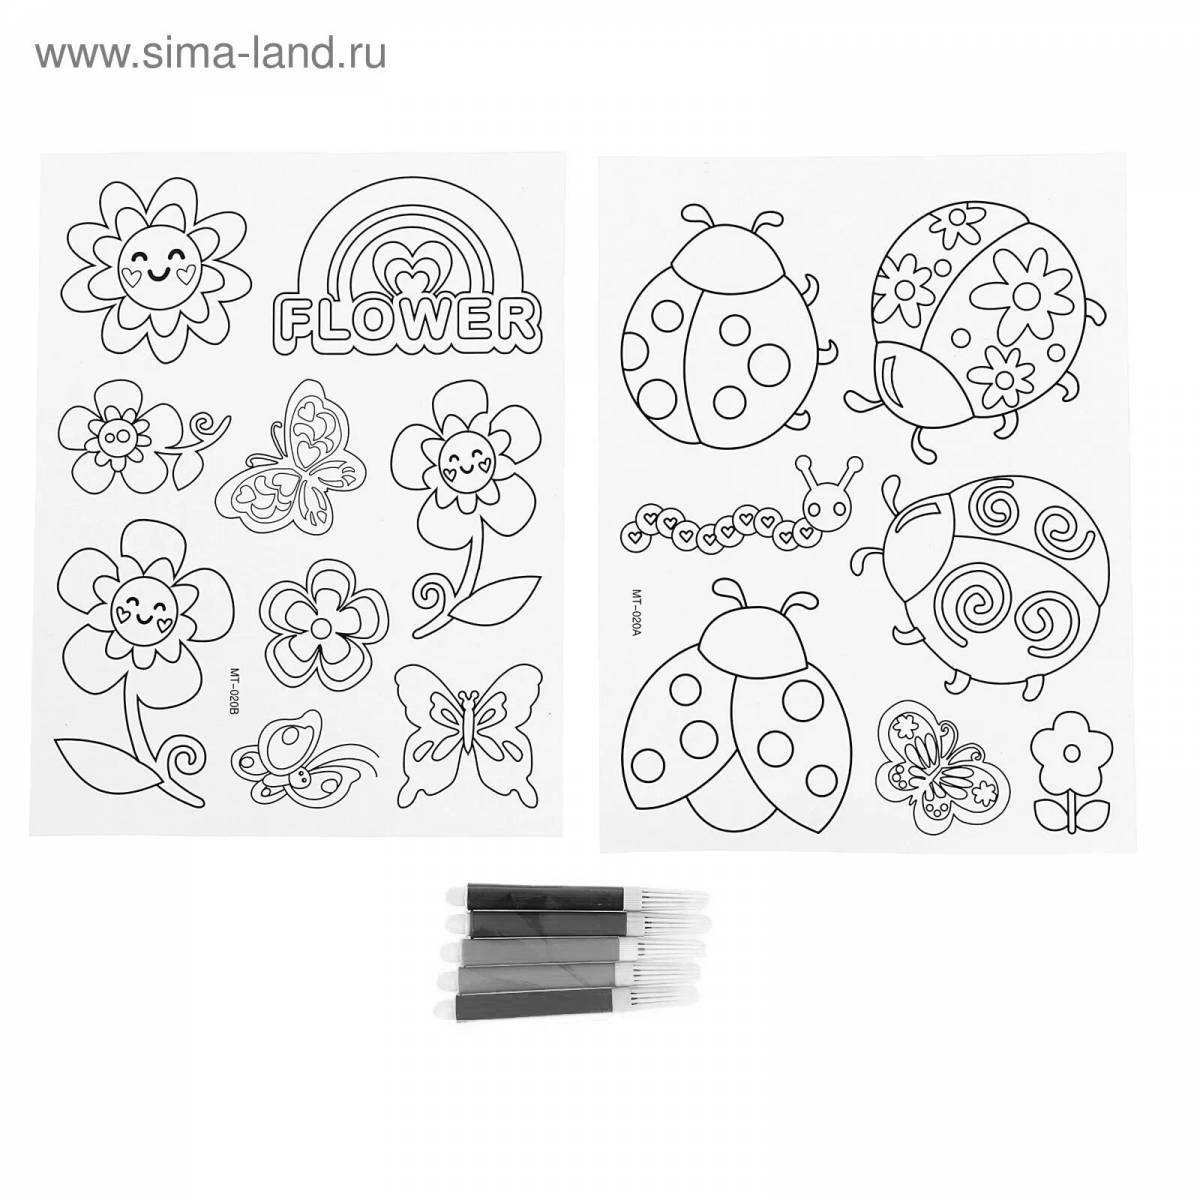 Colorful self-expression coloring book stickers